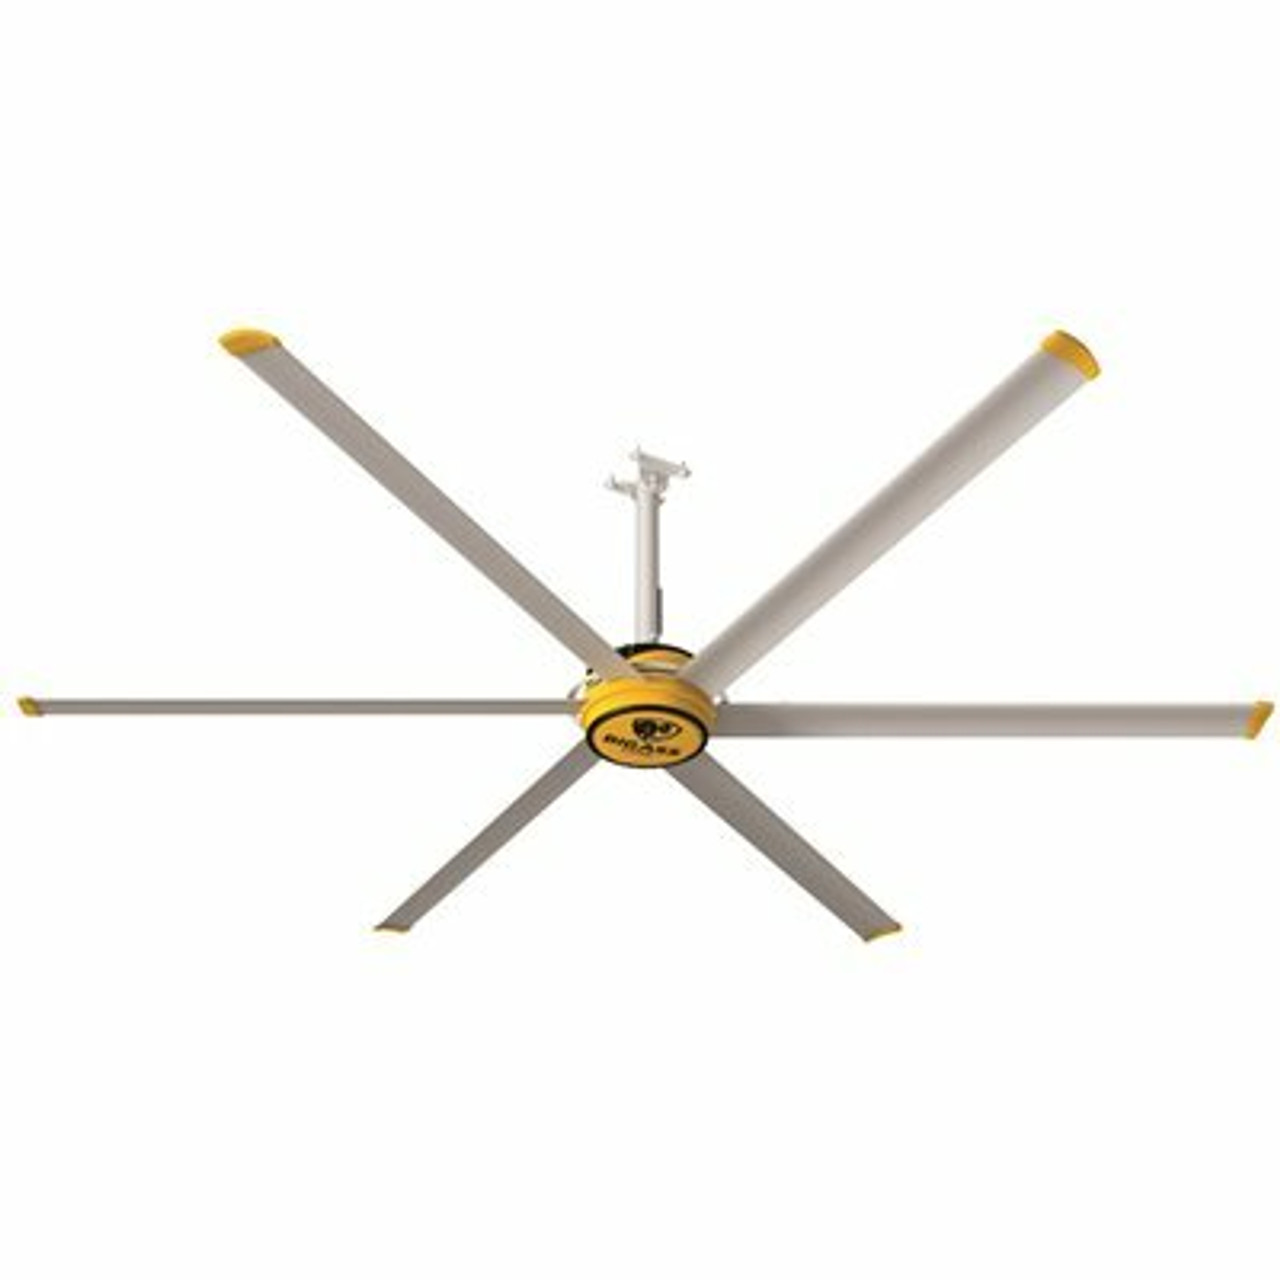 Big Ass Fans 3025 10 Ft. Indoor Yellow And Silver Aluminum Shop Ceiling Fan With Wall Control